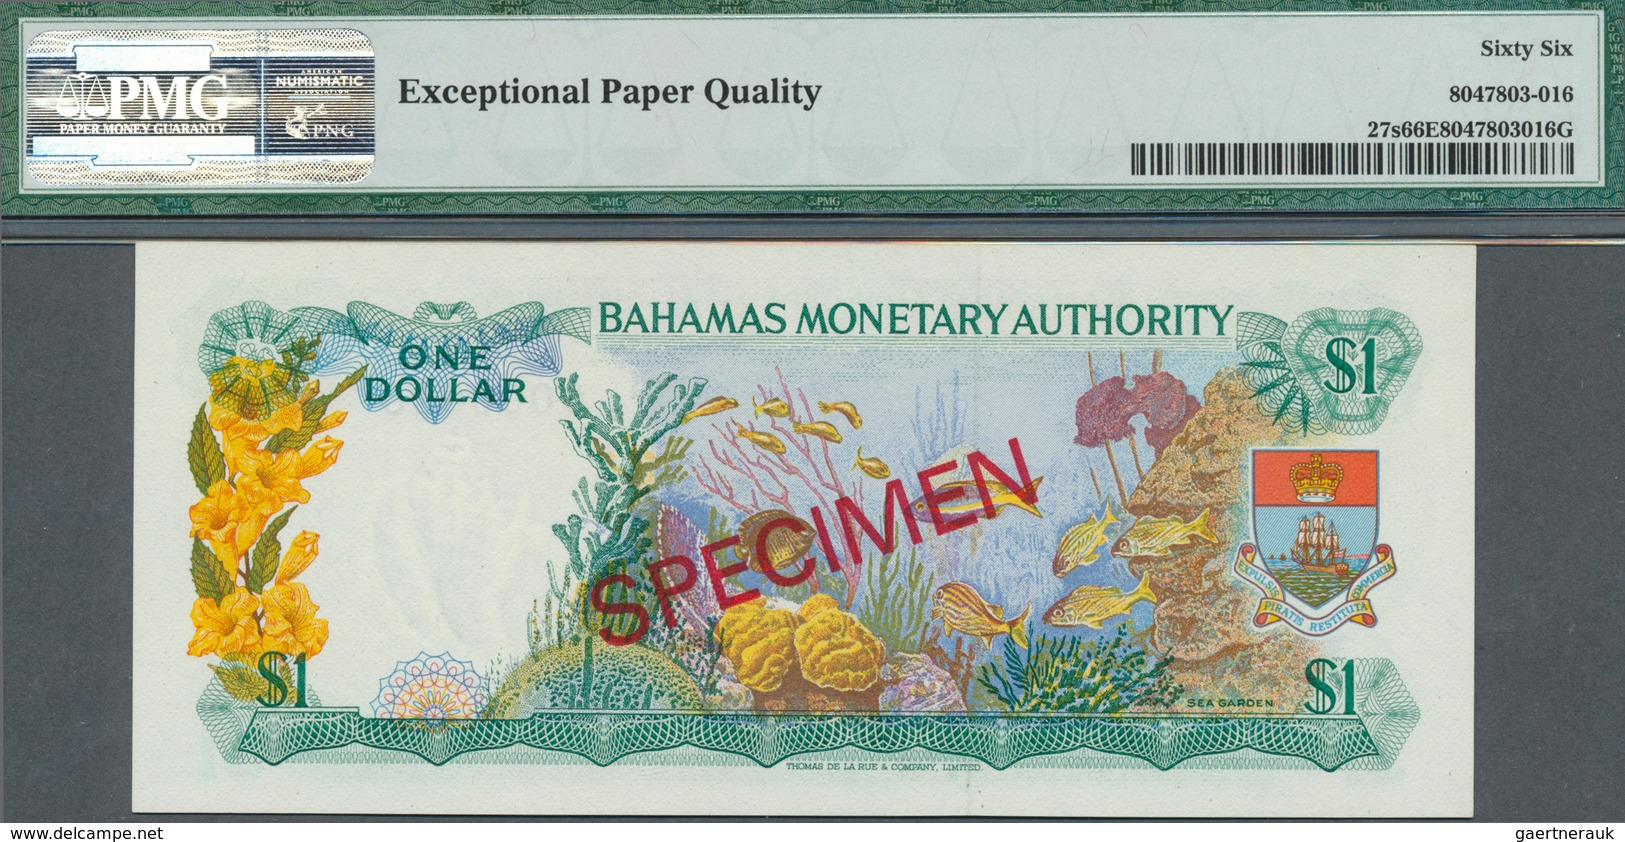 01098 Bahamas: set of 8 SPECIMEN banknotes from 1/2 Dollar 1968 to 100 Dollars 1968 Specimen P. 26s-33s, a